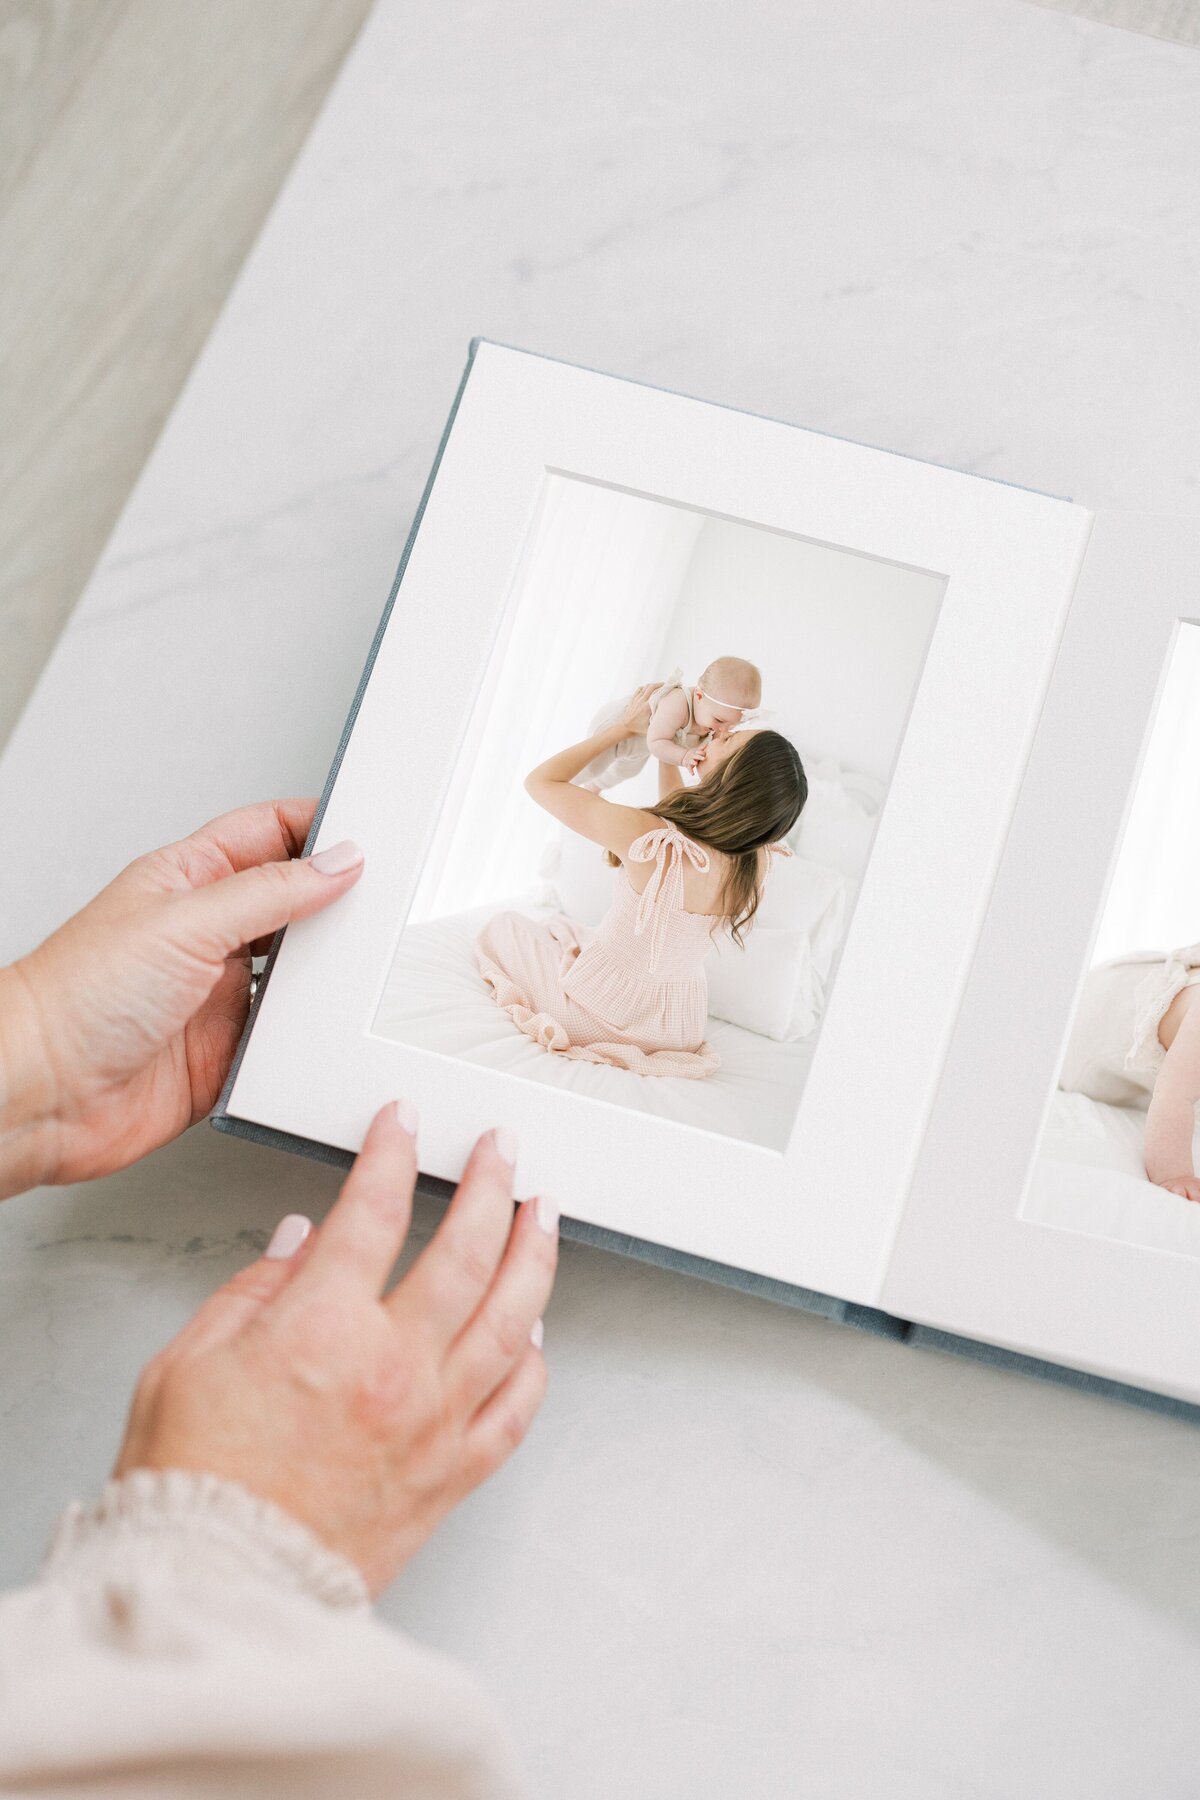 Hands holding matted folio album with printed images from mommy and me session with 6 month old baby